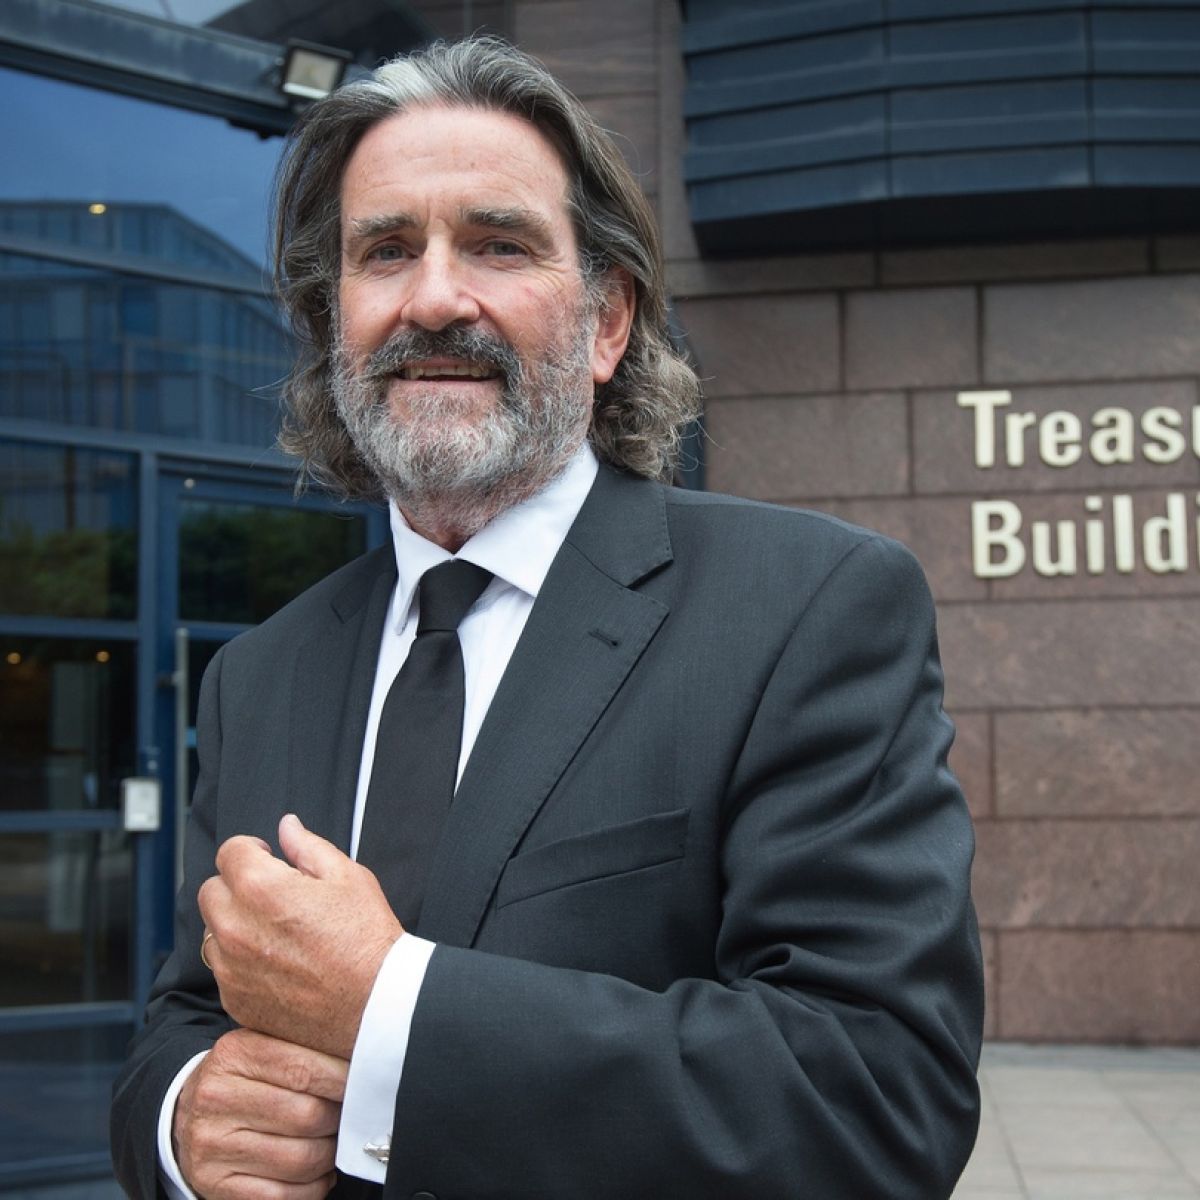 Johnny Ronan Appeal To Taoiseach On Tower Height Falls On Deaf Ears